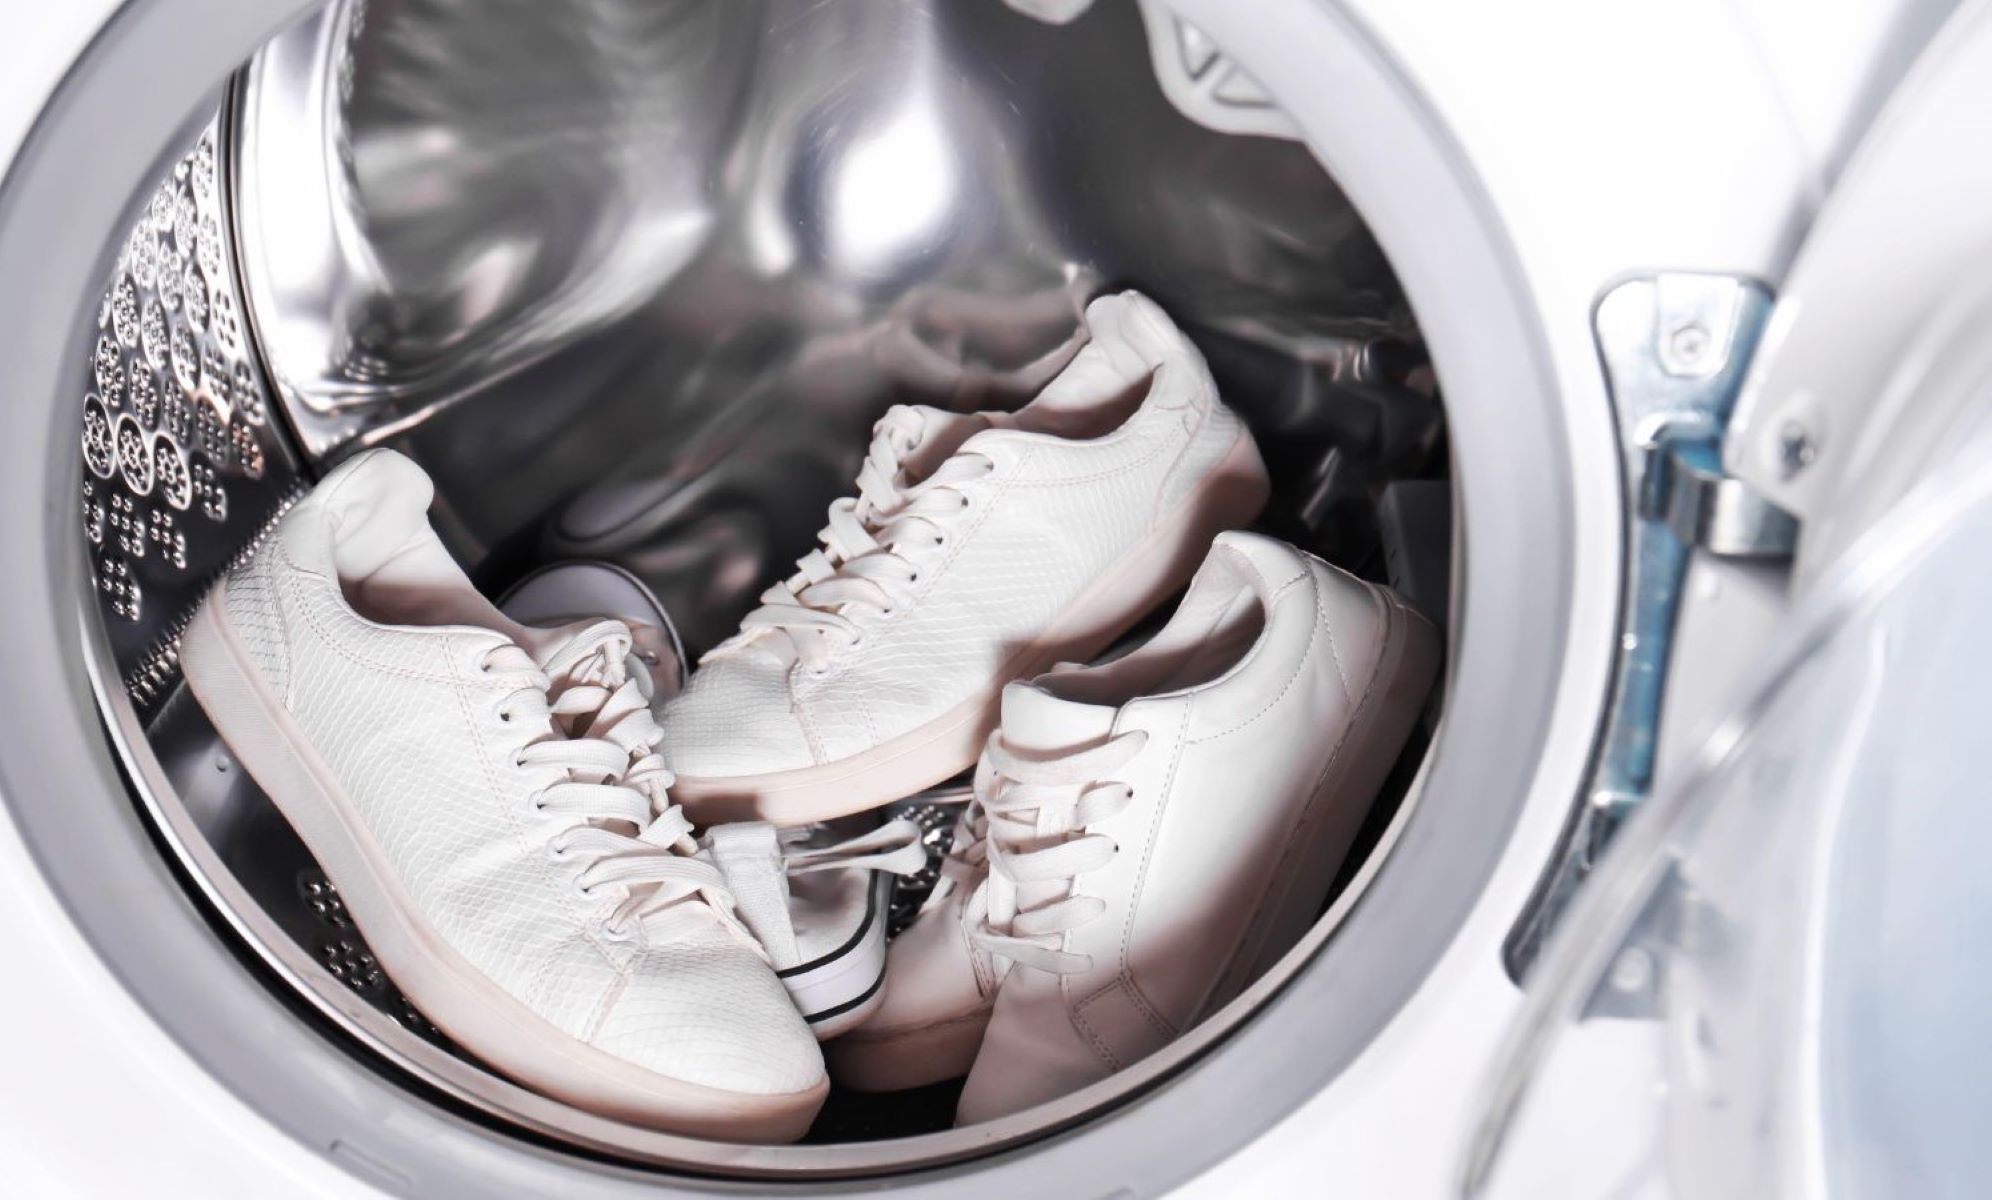 How To Wash White Canvas Shoes In The Washing Machine